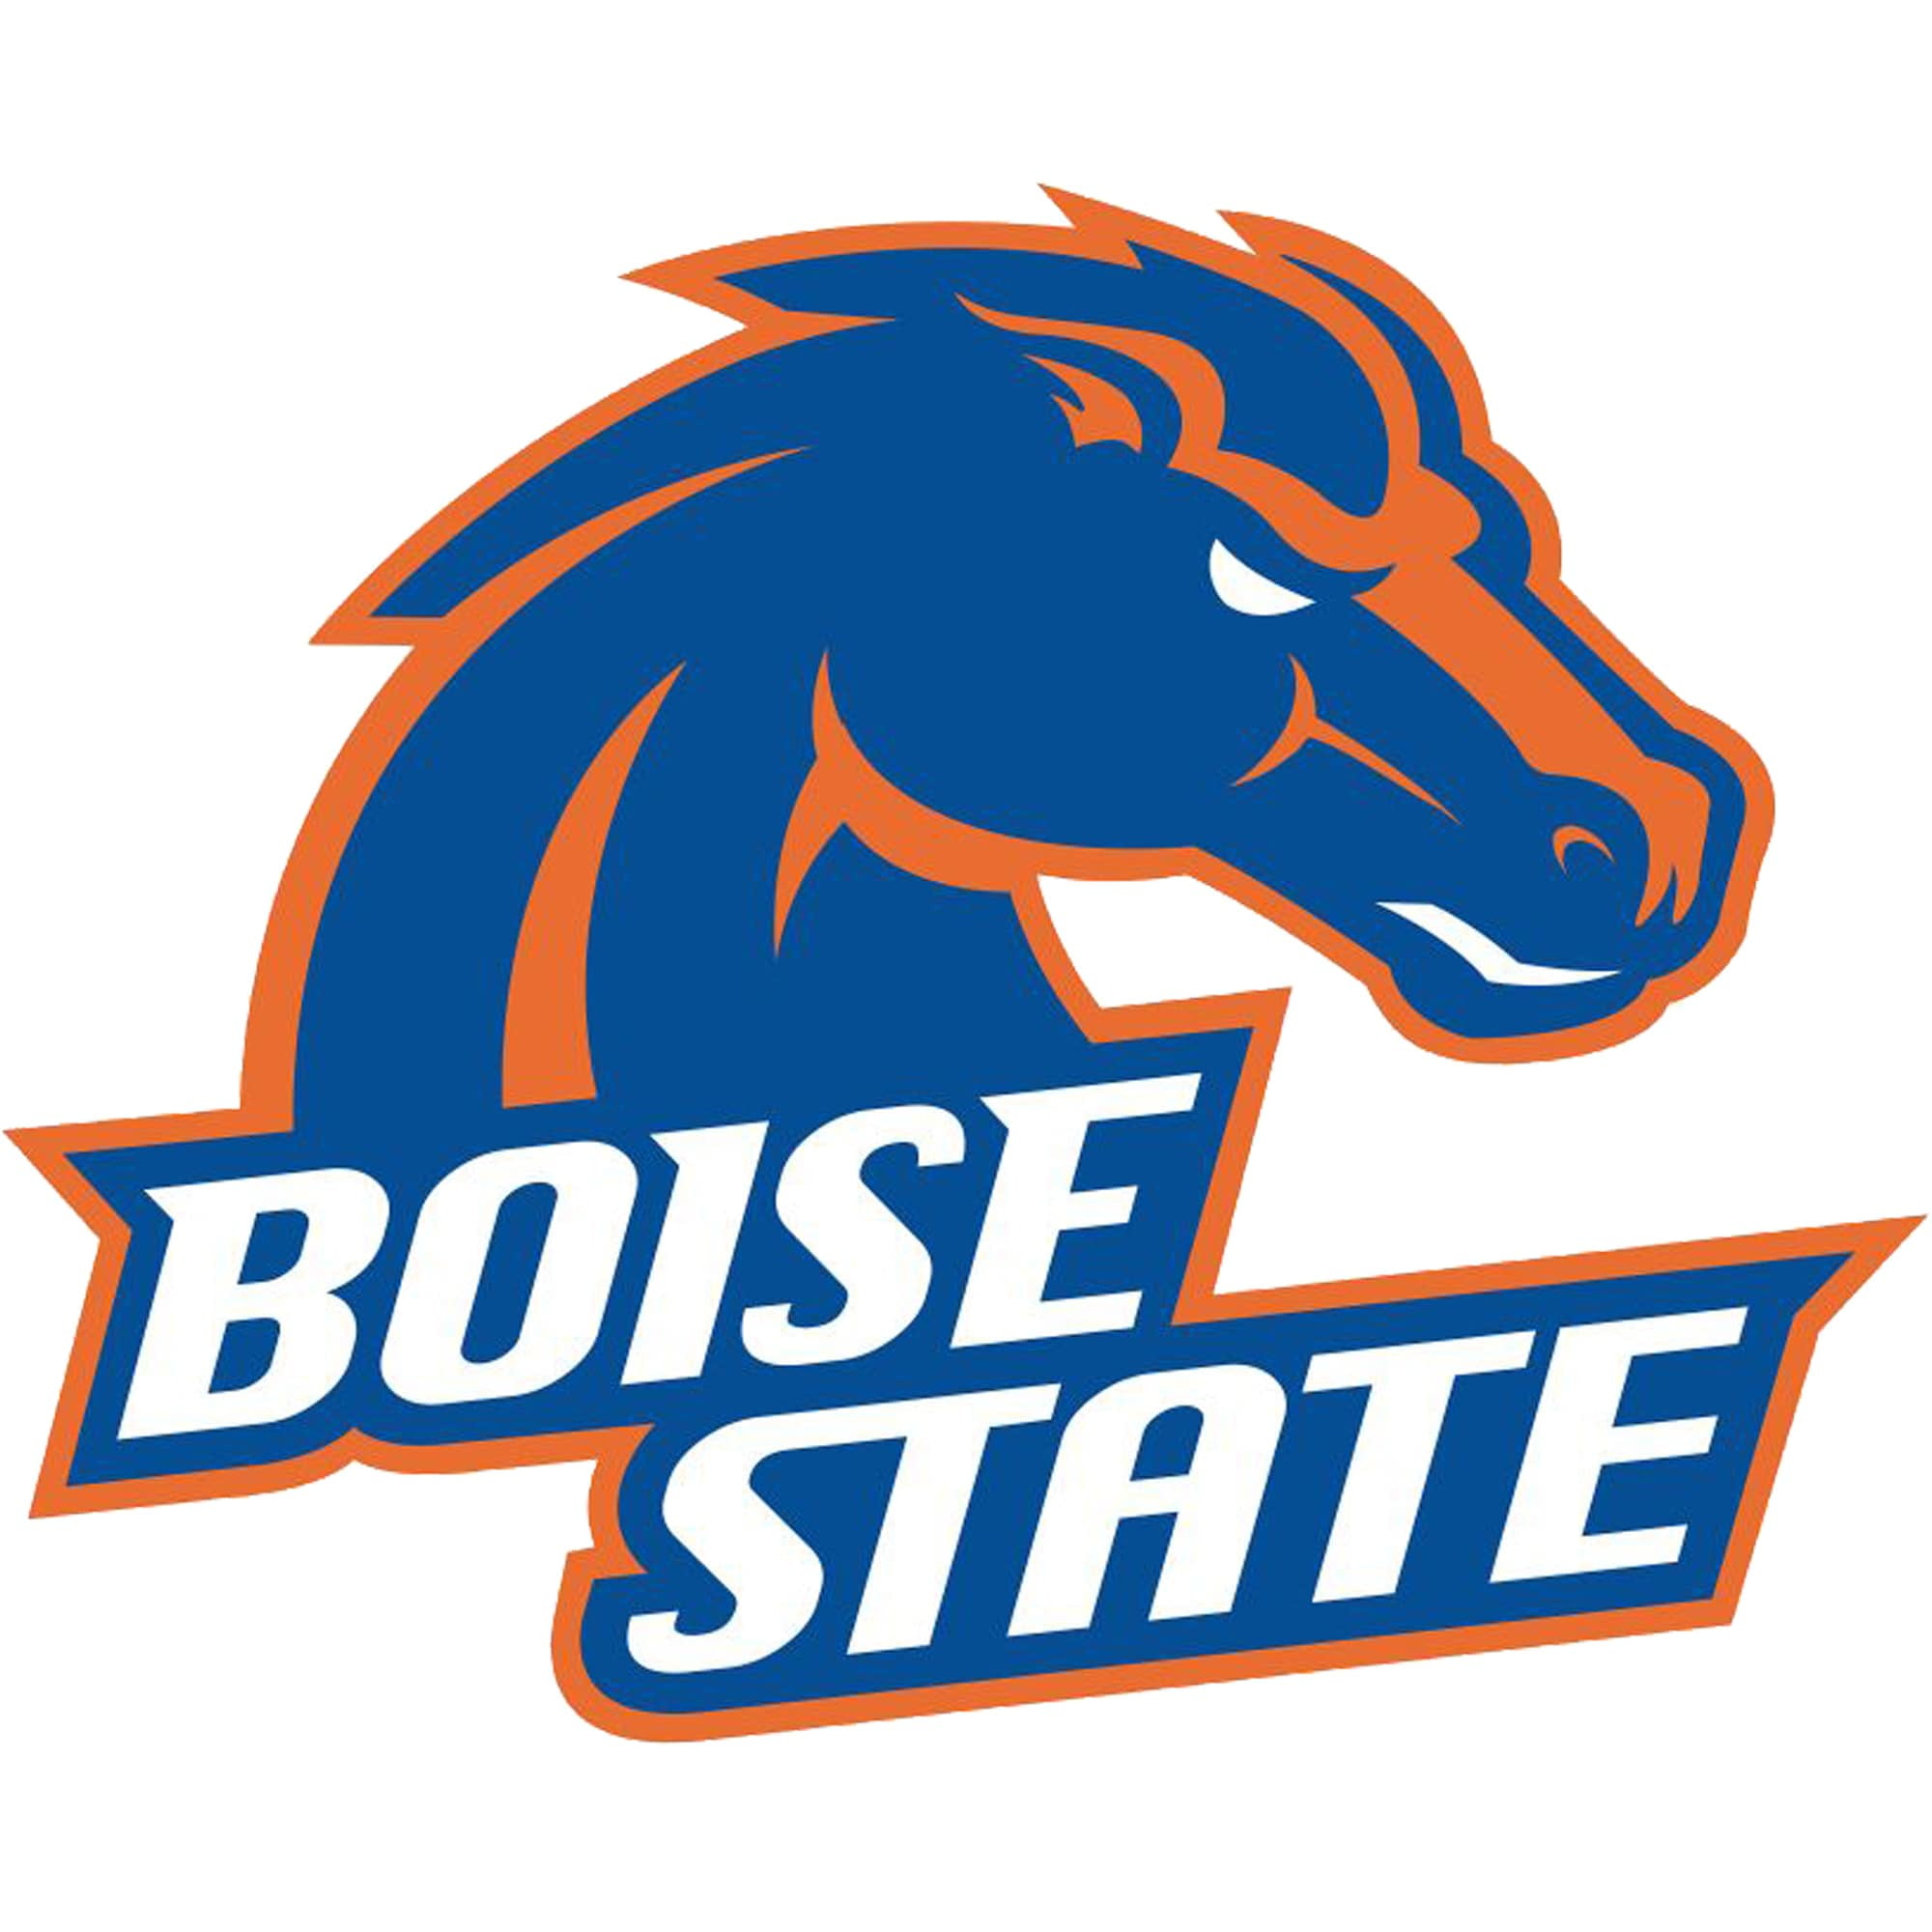 Boise State Broncos 9" Wide Premium Vinyl Decal Sticker Full Color NCAA 